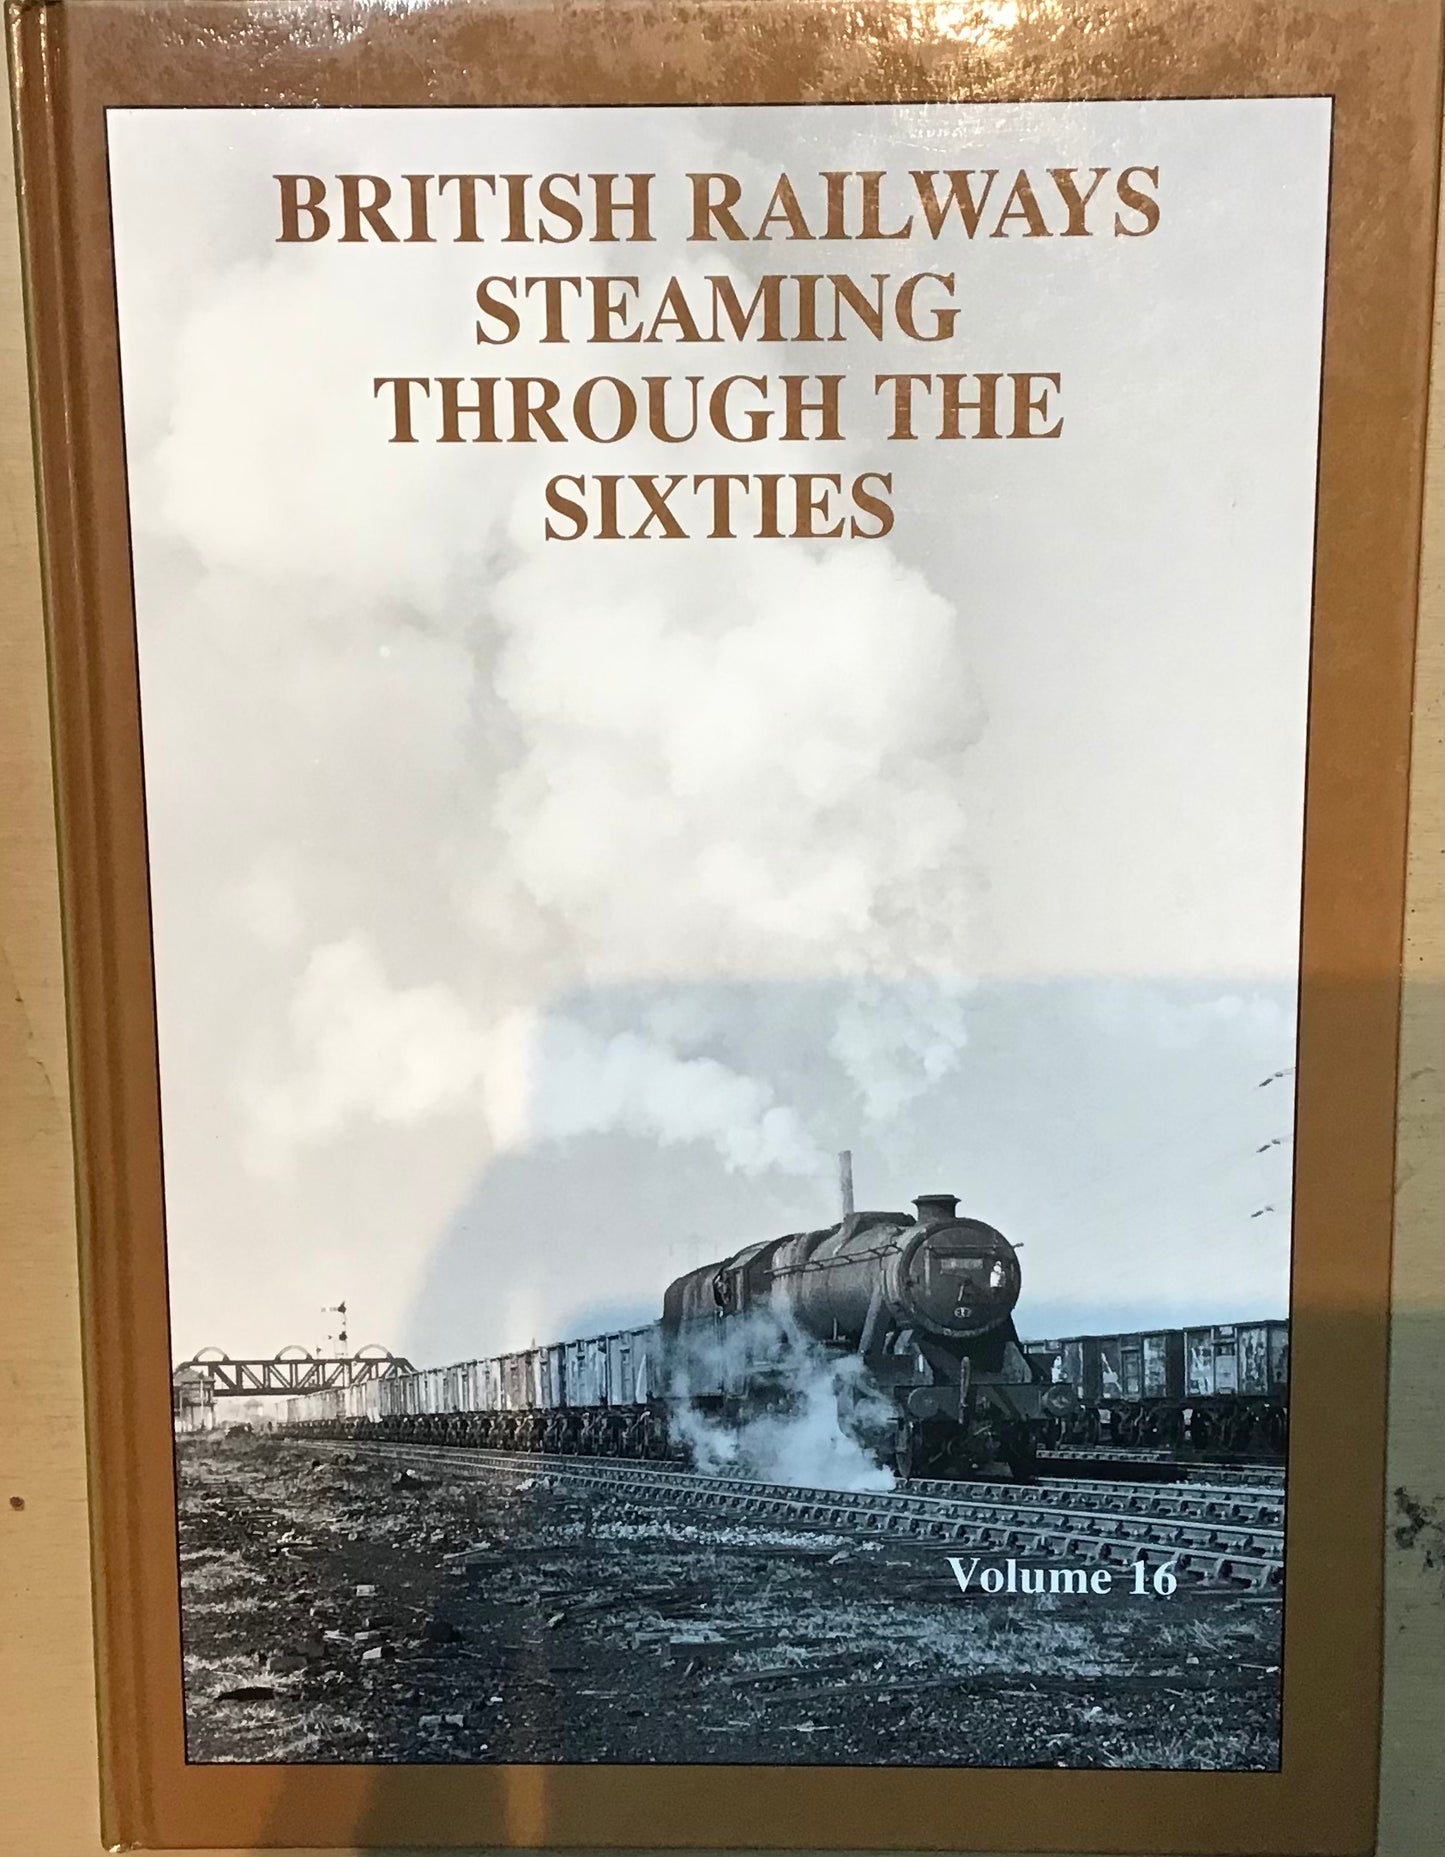 British Railways Steaming Through the Sixties Volume 16 - Chester Model Centre